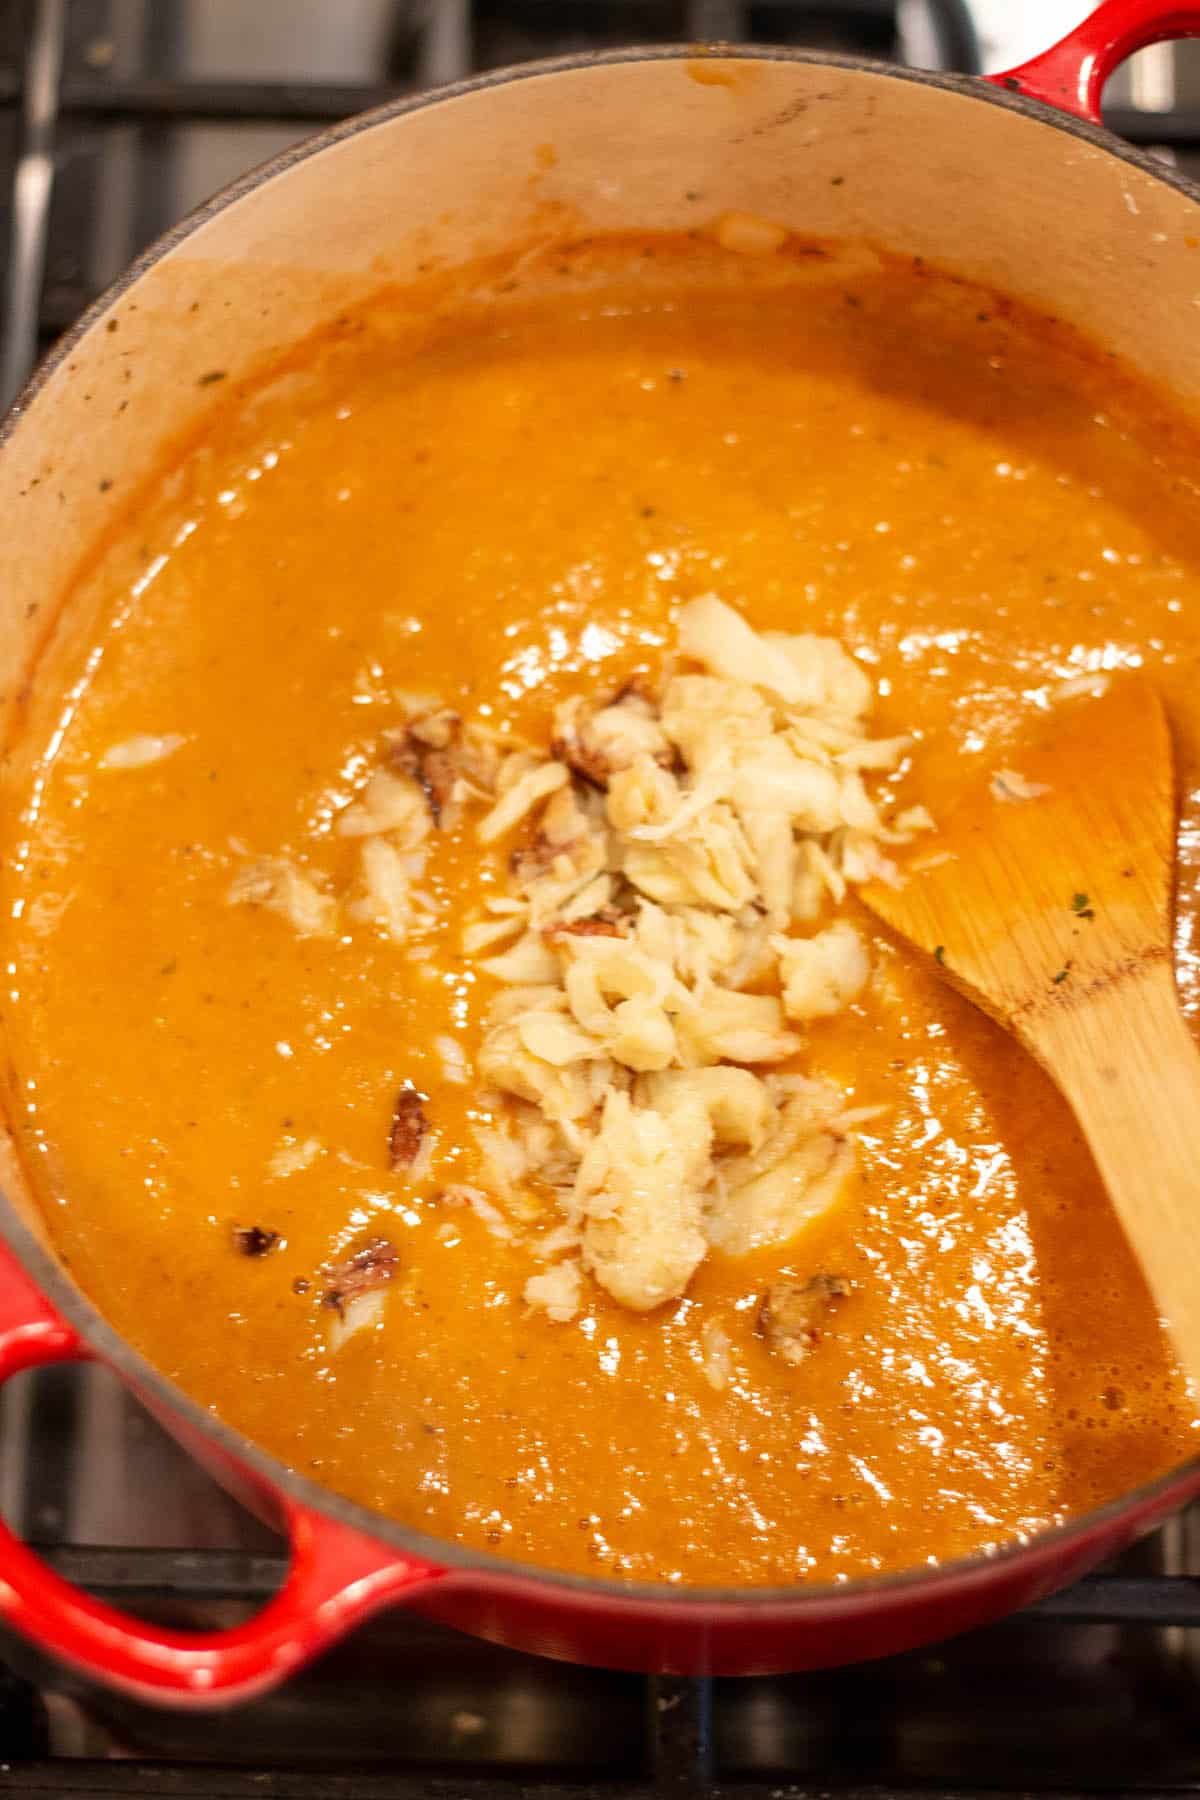 A creamy tomato soup with a pile of crab meat on top being stirred in.